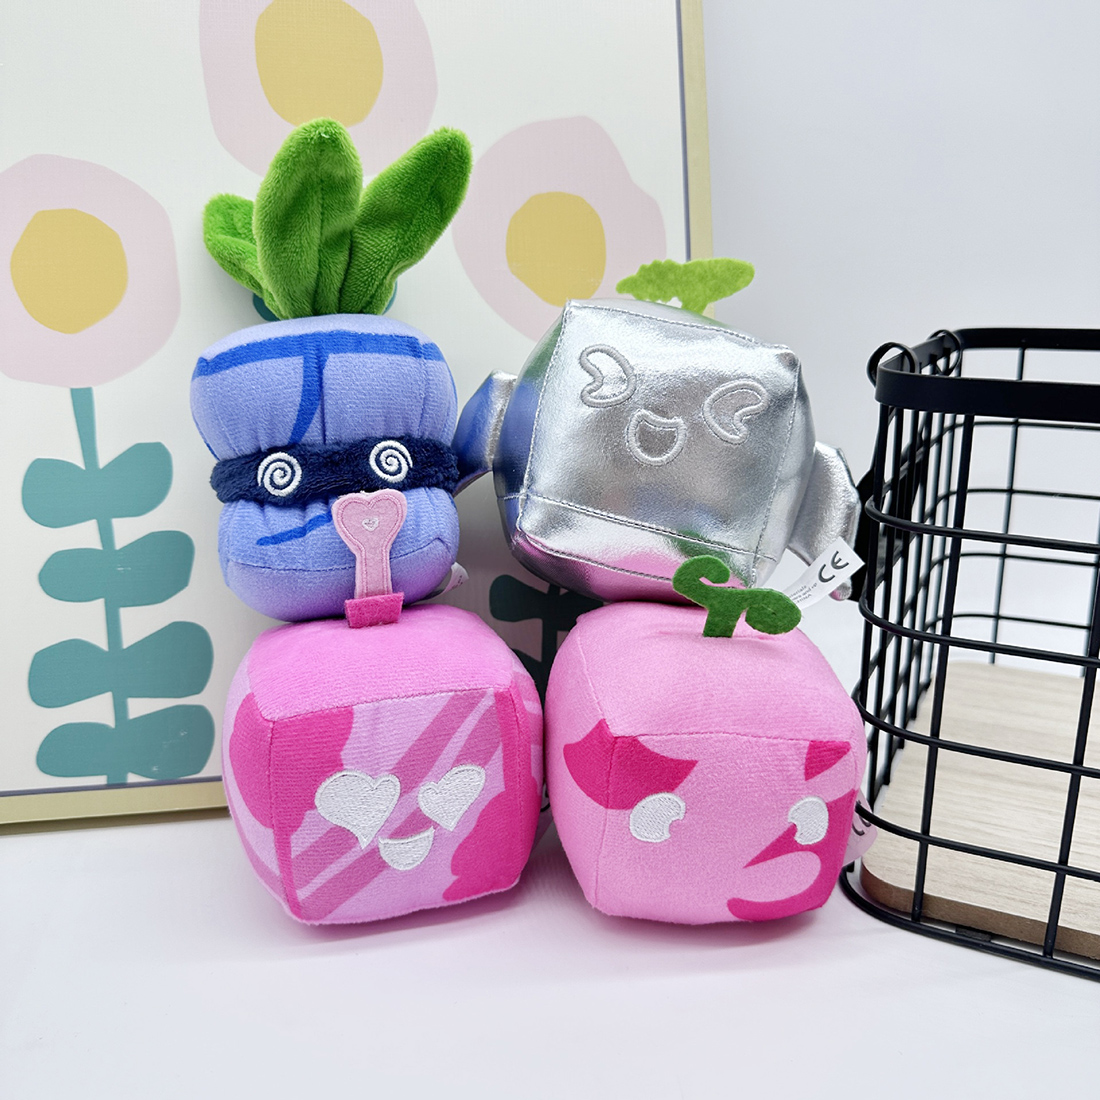 Cute Blox Fruits Anime Game Plush Toy Fruit Leopard Pattern Box Plush Toy  20cm Soft Stuffed Fruits Toy Christmas Gift For Kids - AliExpress